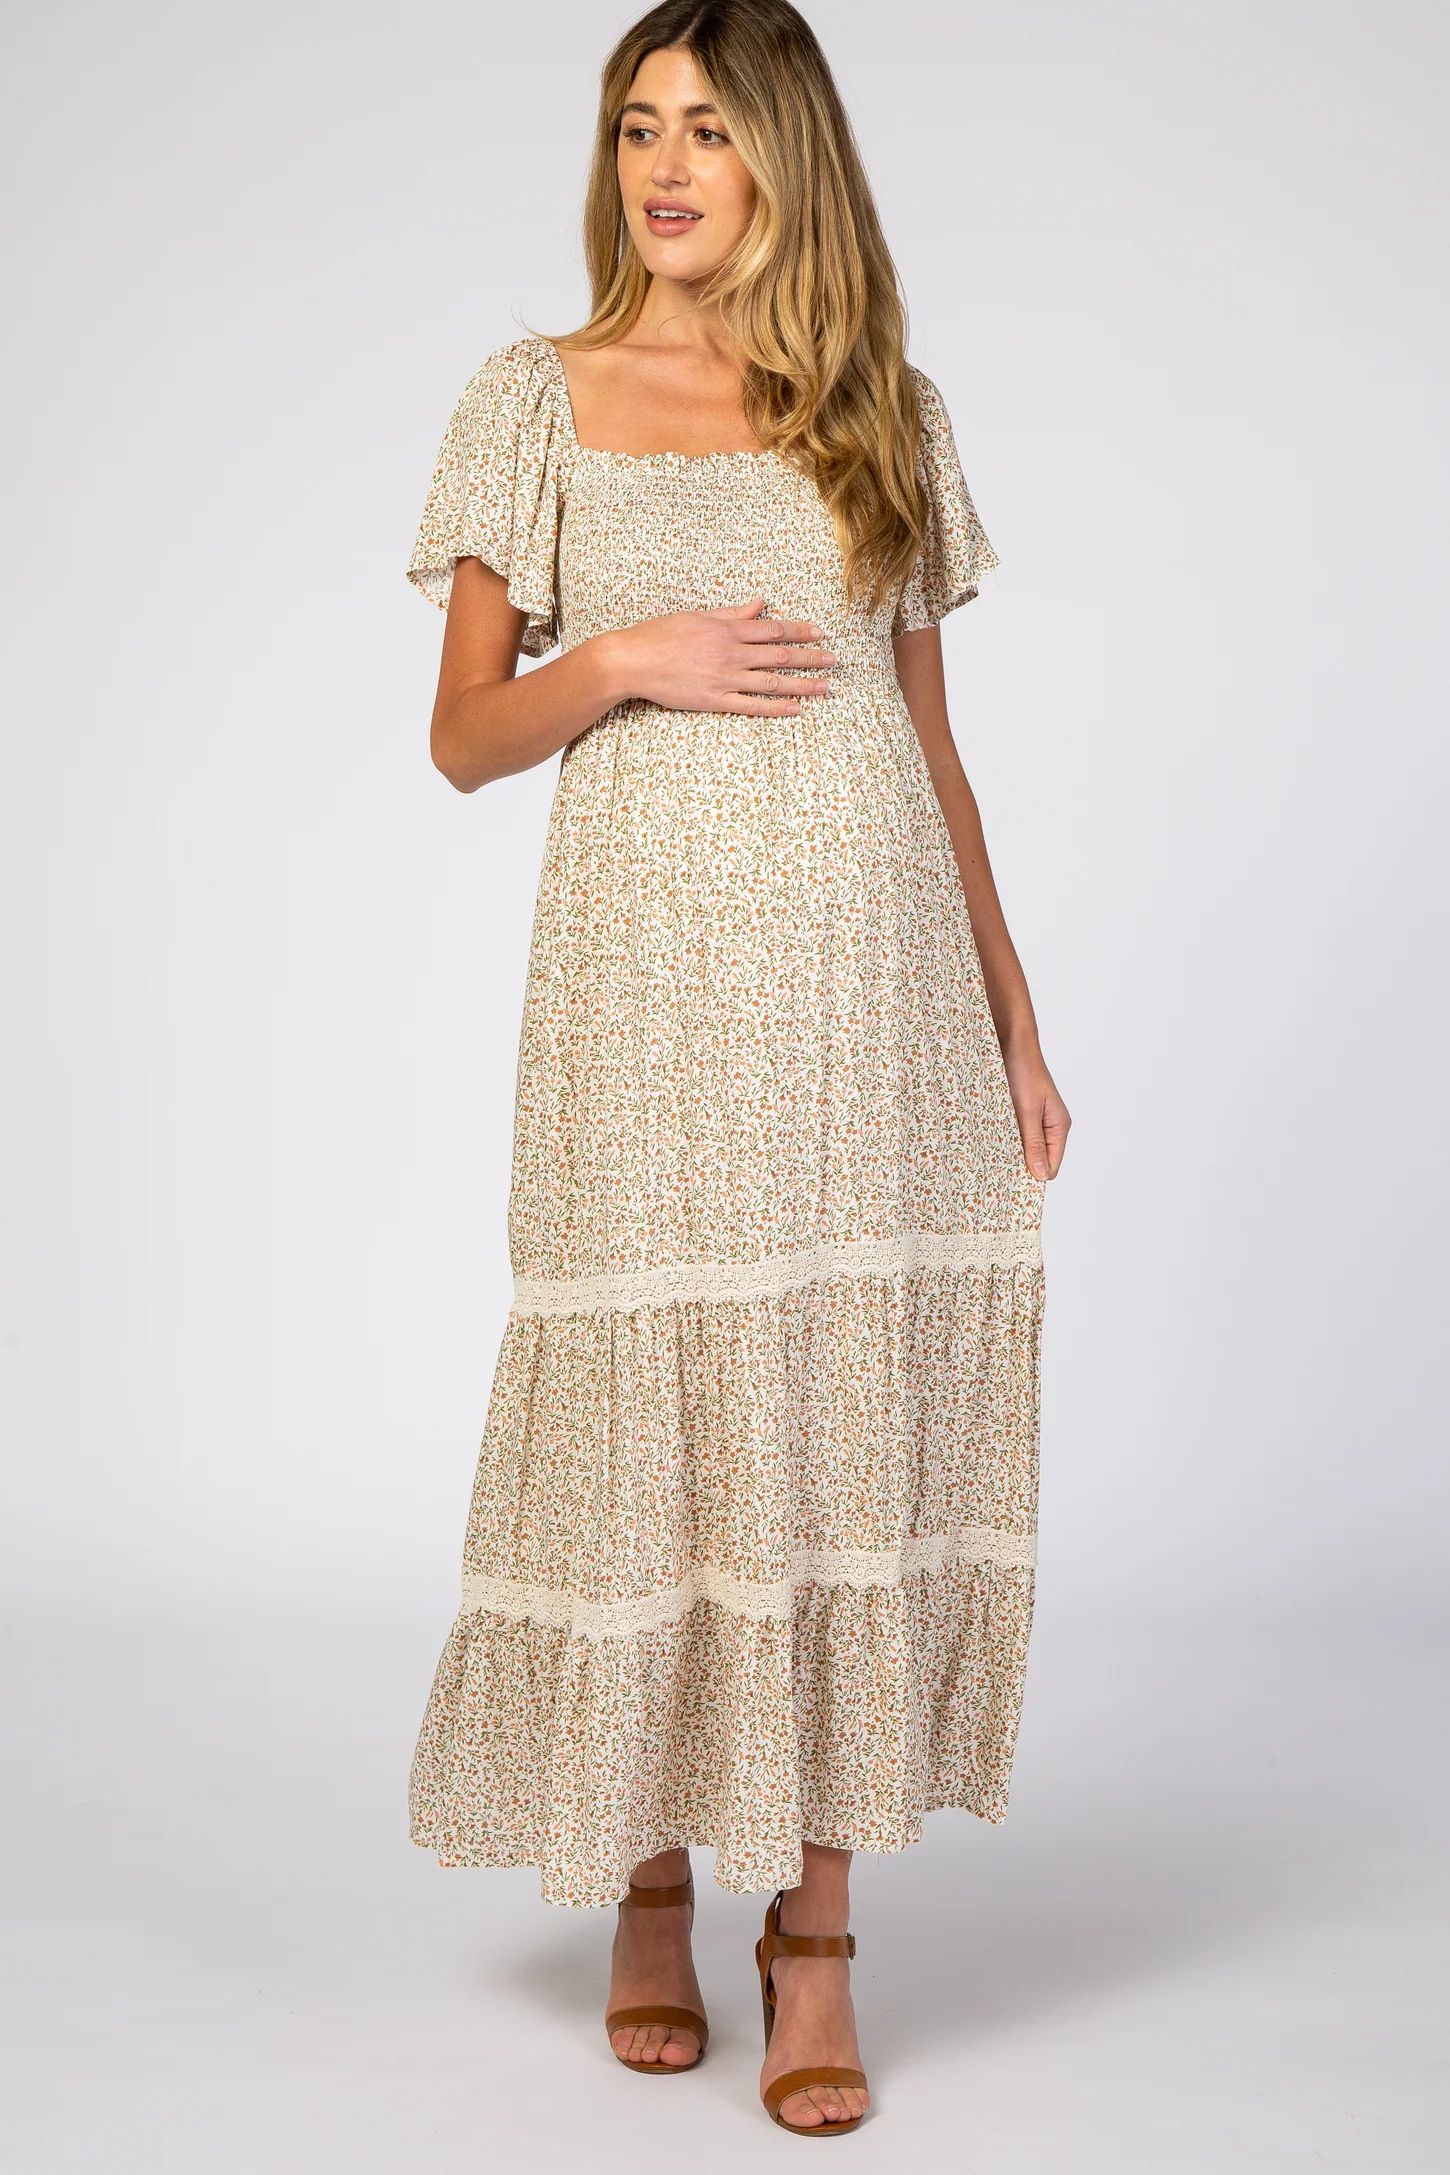 Ivory Floral Square Neck Smocked Front Lace Trim Maternity Maxi Dress | PinkBlush Maternity